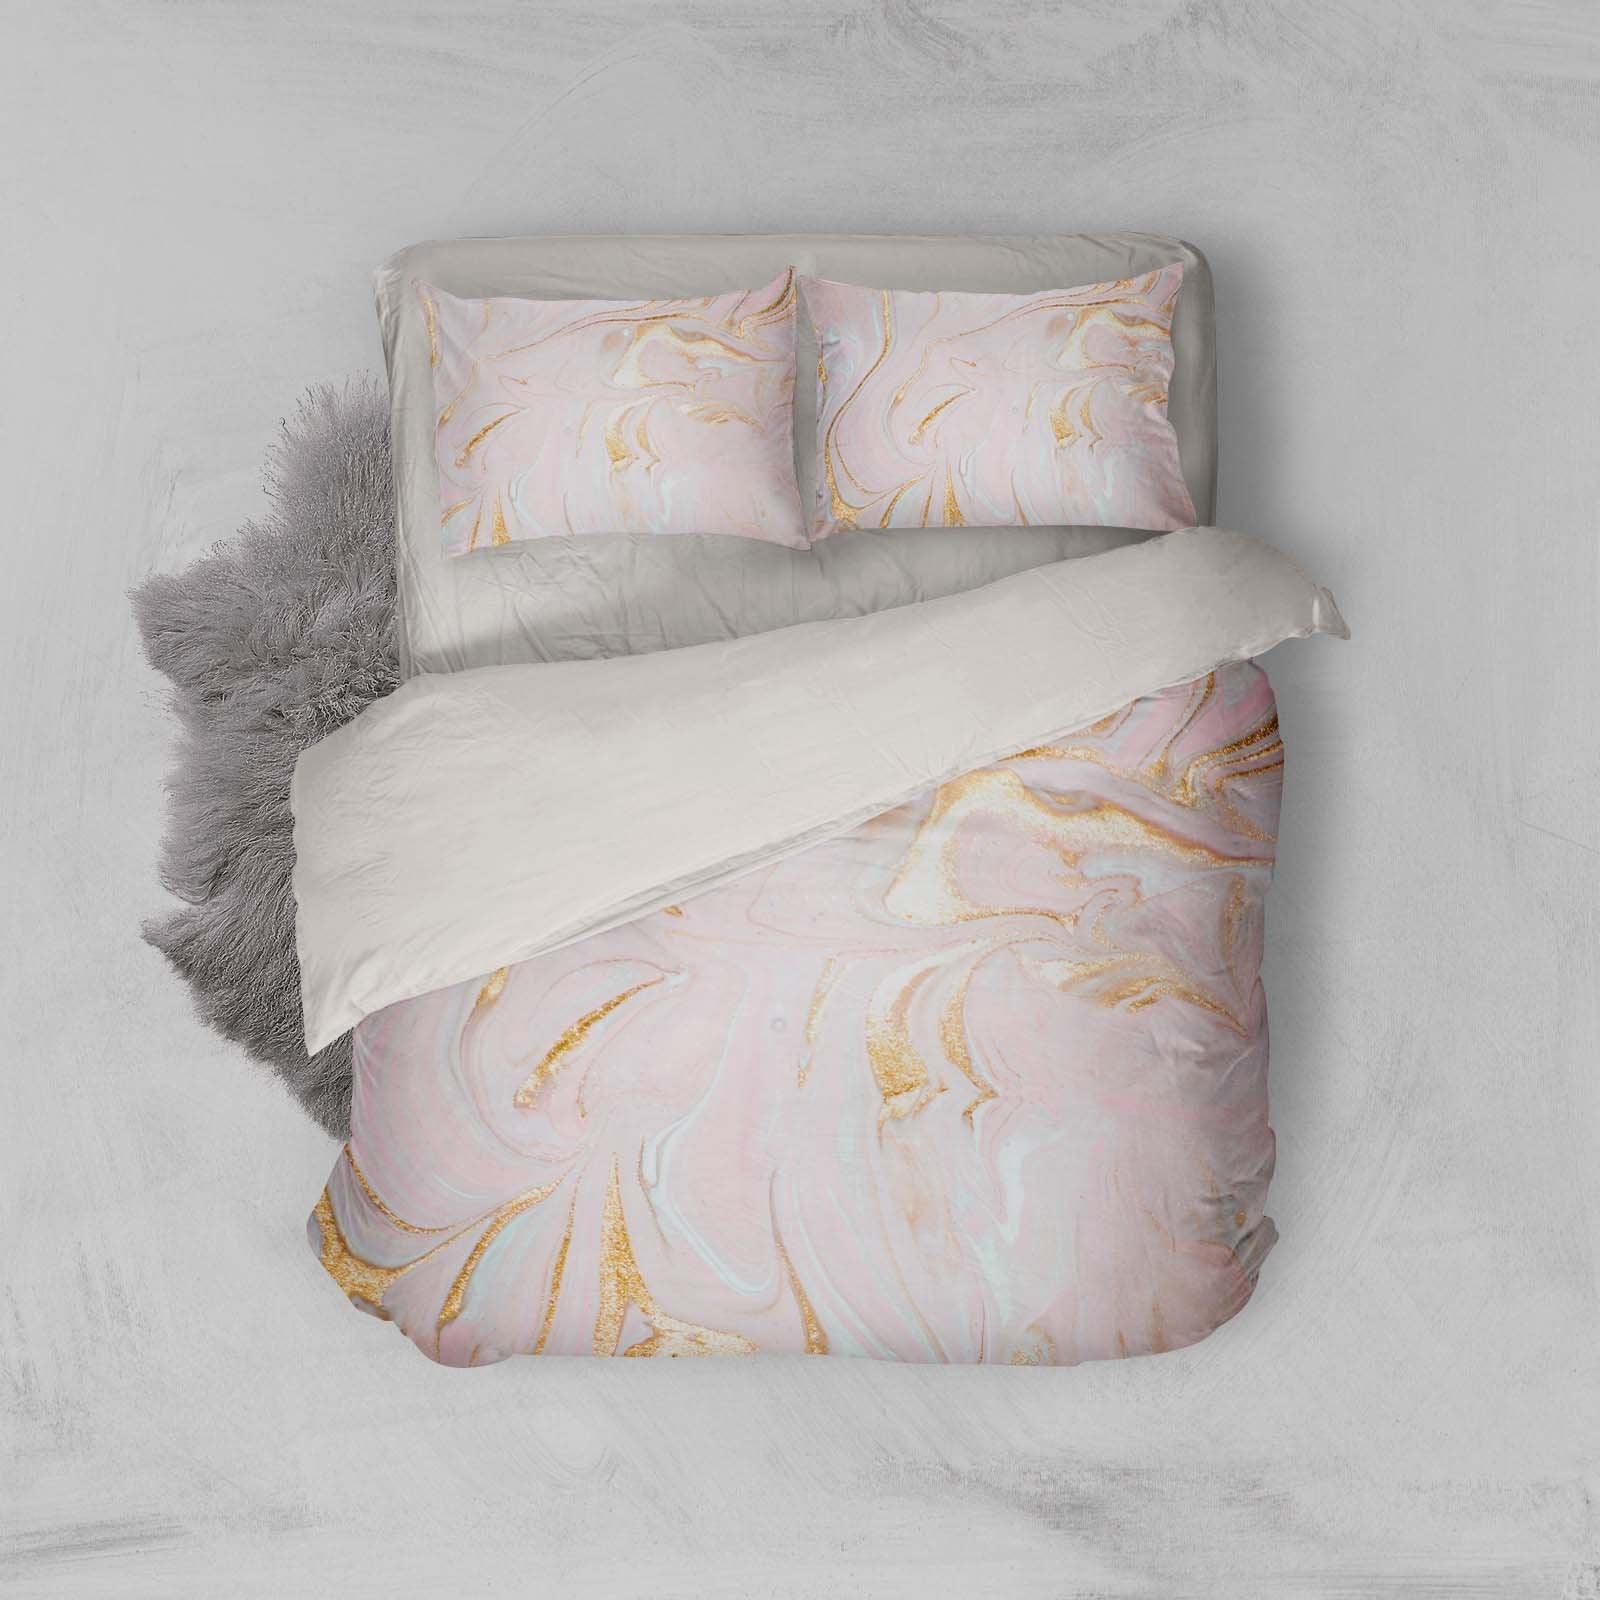 3D Pink-tones, marbled Bedding Set Quilt Cover Quilt Duvet Cover ,Pillowcases Personalized  Bedding,Queen, King ,Full, Double 3 Pcs- Jess Art Decoration